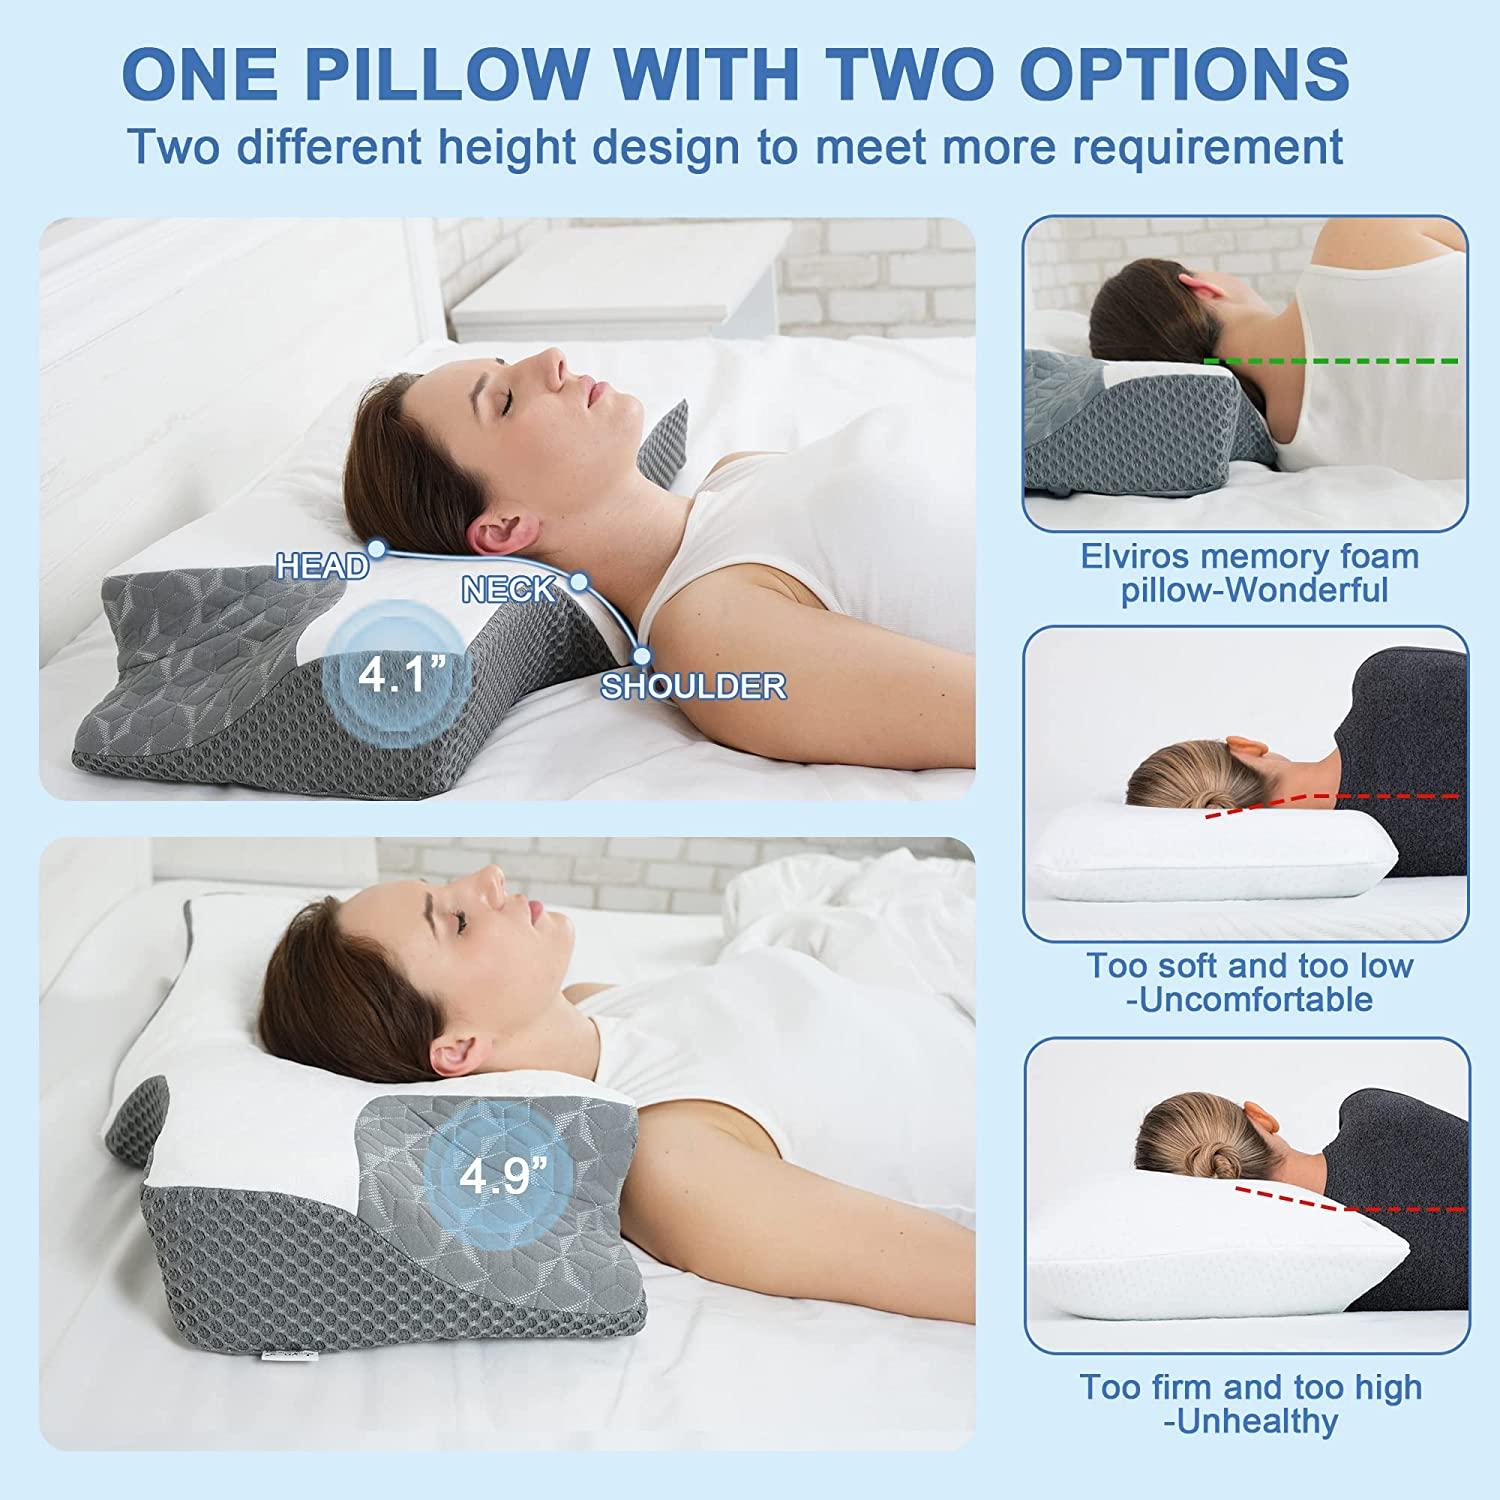 Confourm Neck Pillow, Back & Side Sleepers